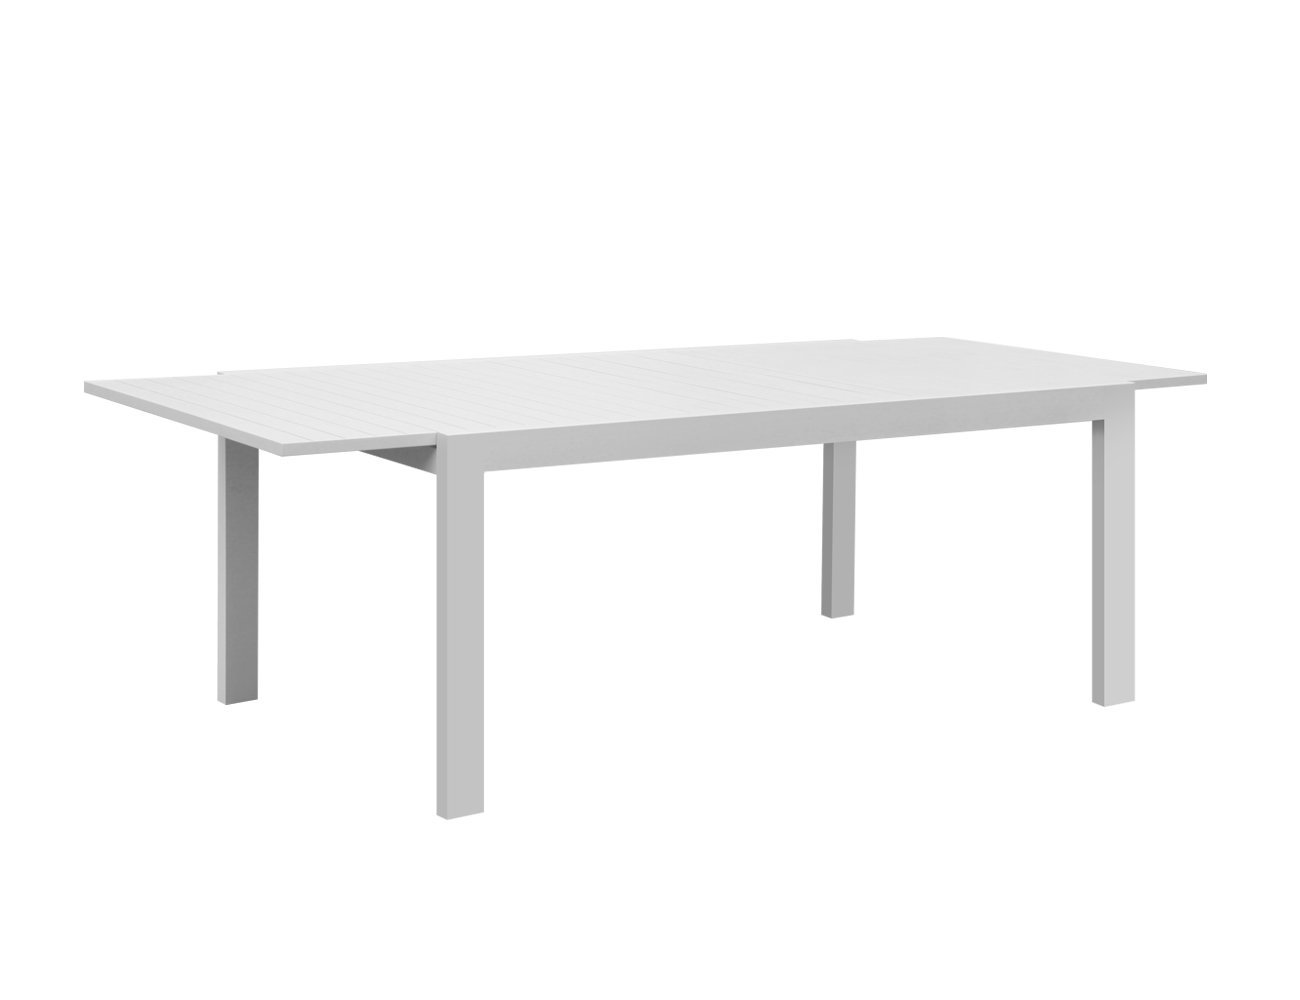 Cumulus Outdoor Extension Table - White